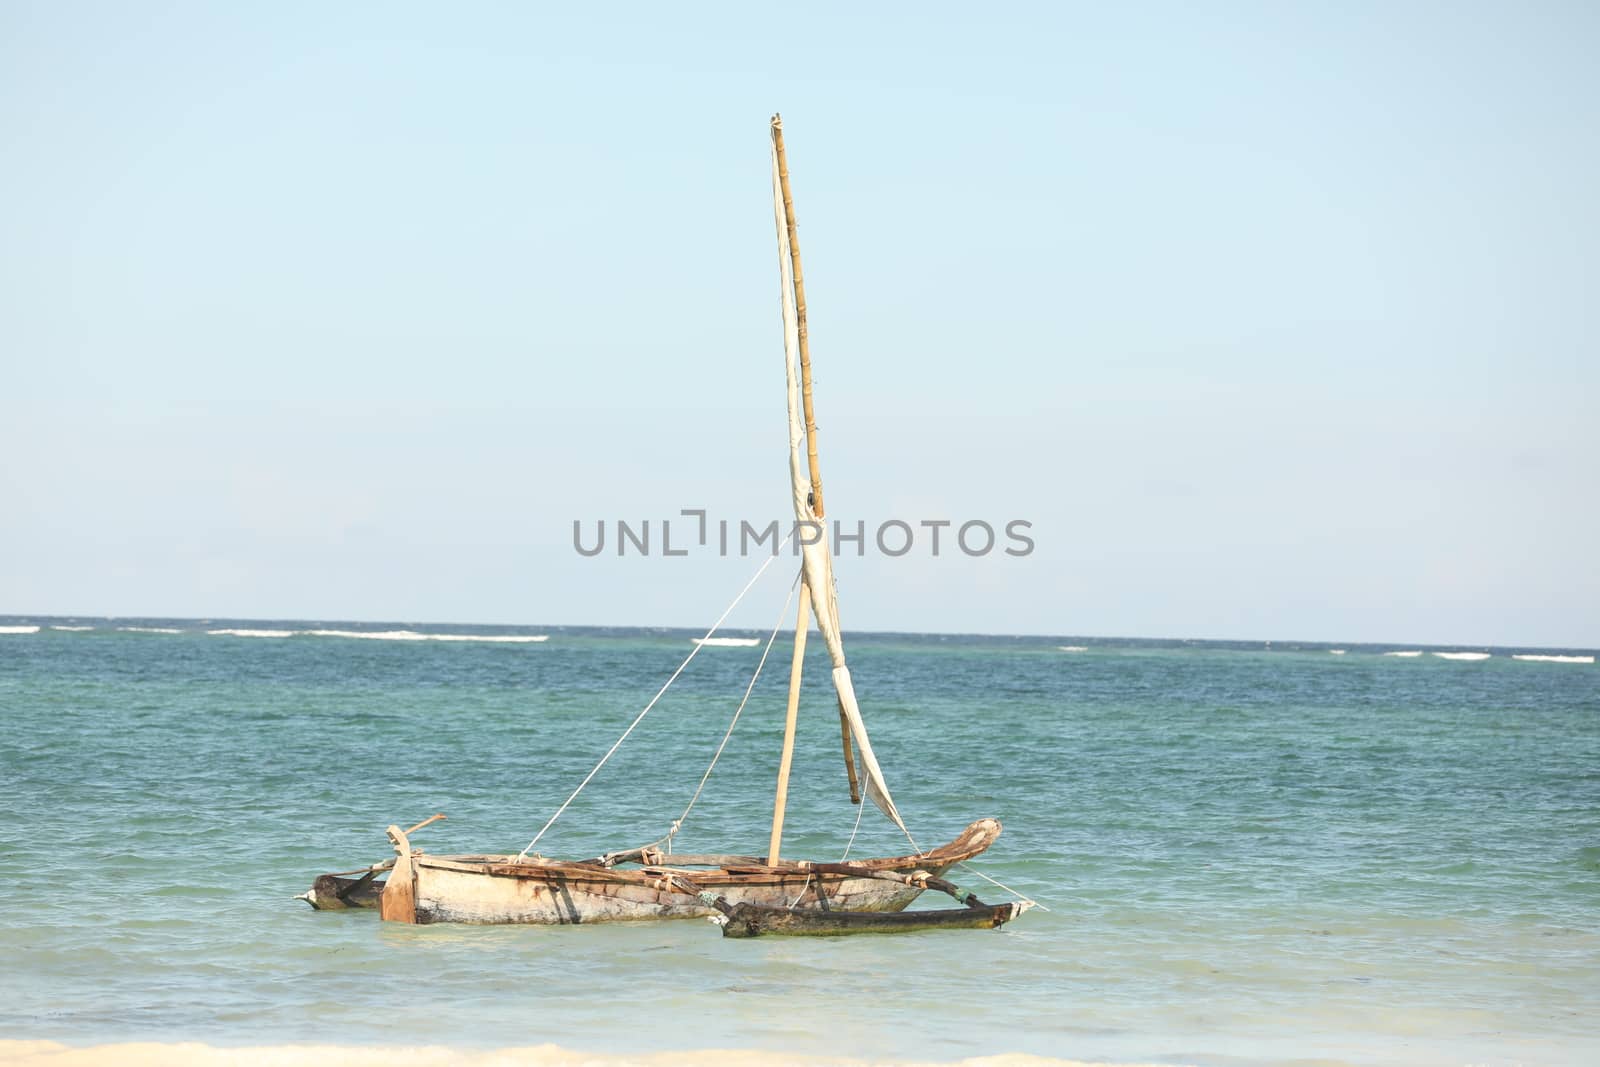 Old Boat in the Beach